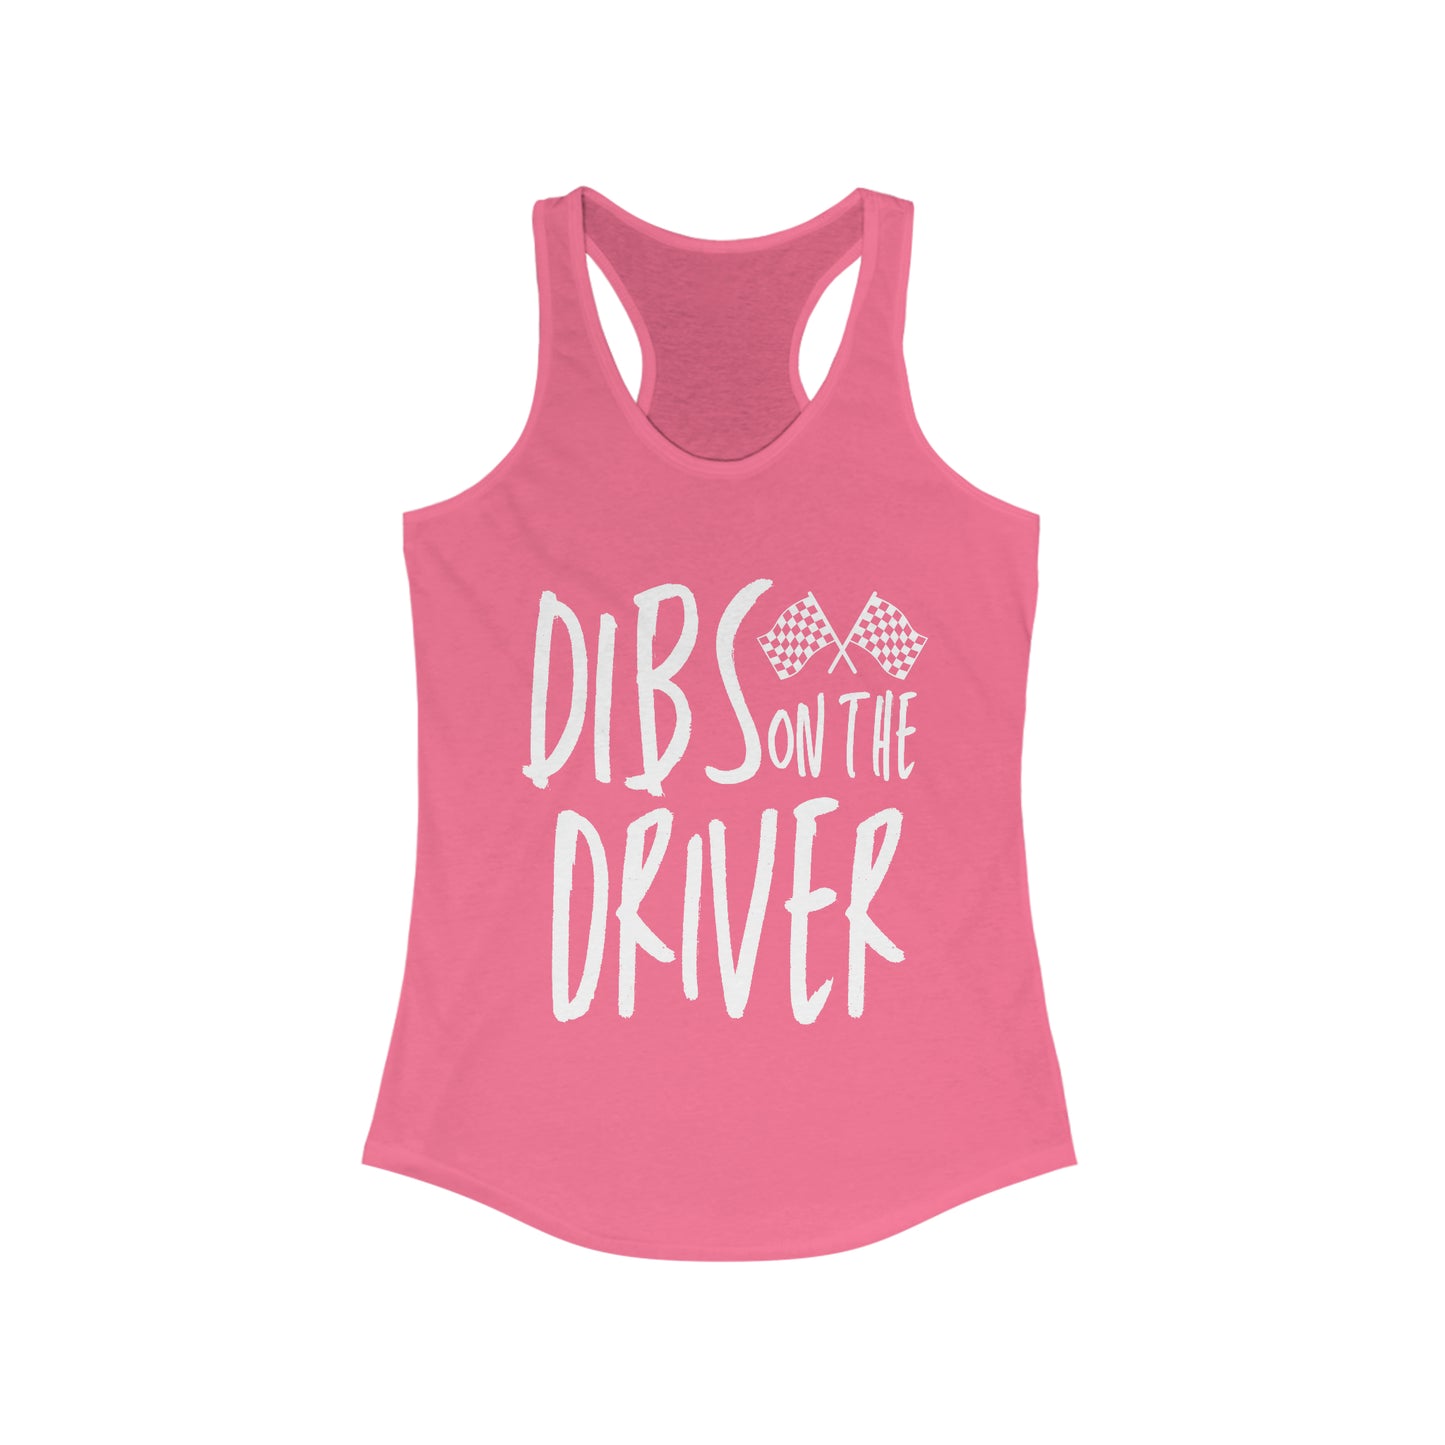 Dib's On The Driver Tank Top